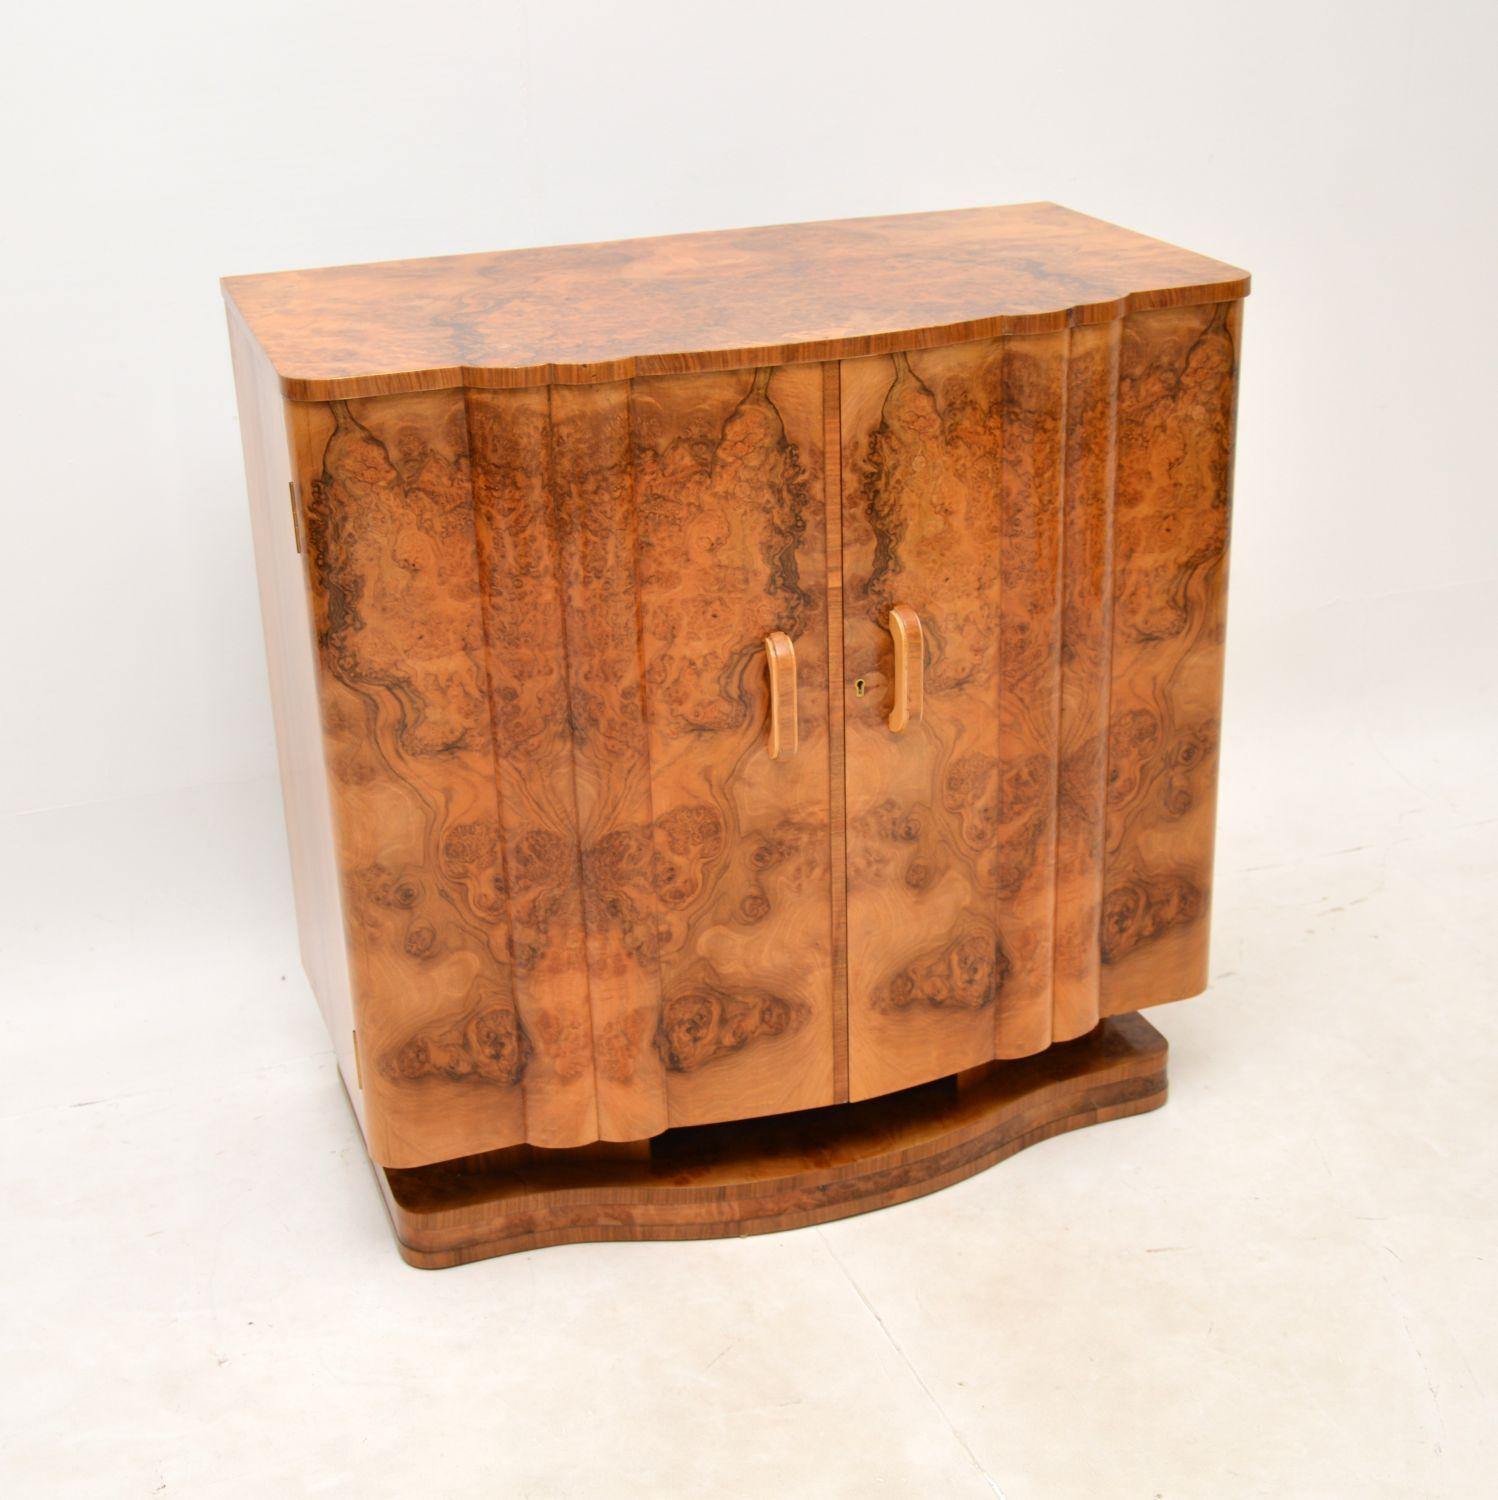 A stunning Art Deco burr walnut cabinet by Harry and Lou Epstein. This was made in England, it dates from the 1920-30’s.

It is of exceptional quality, with a lovely compact design and beautifully fitted interior. The burr walnut grain patterns and